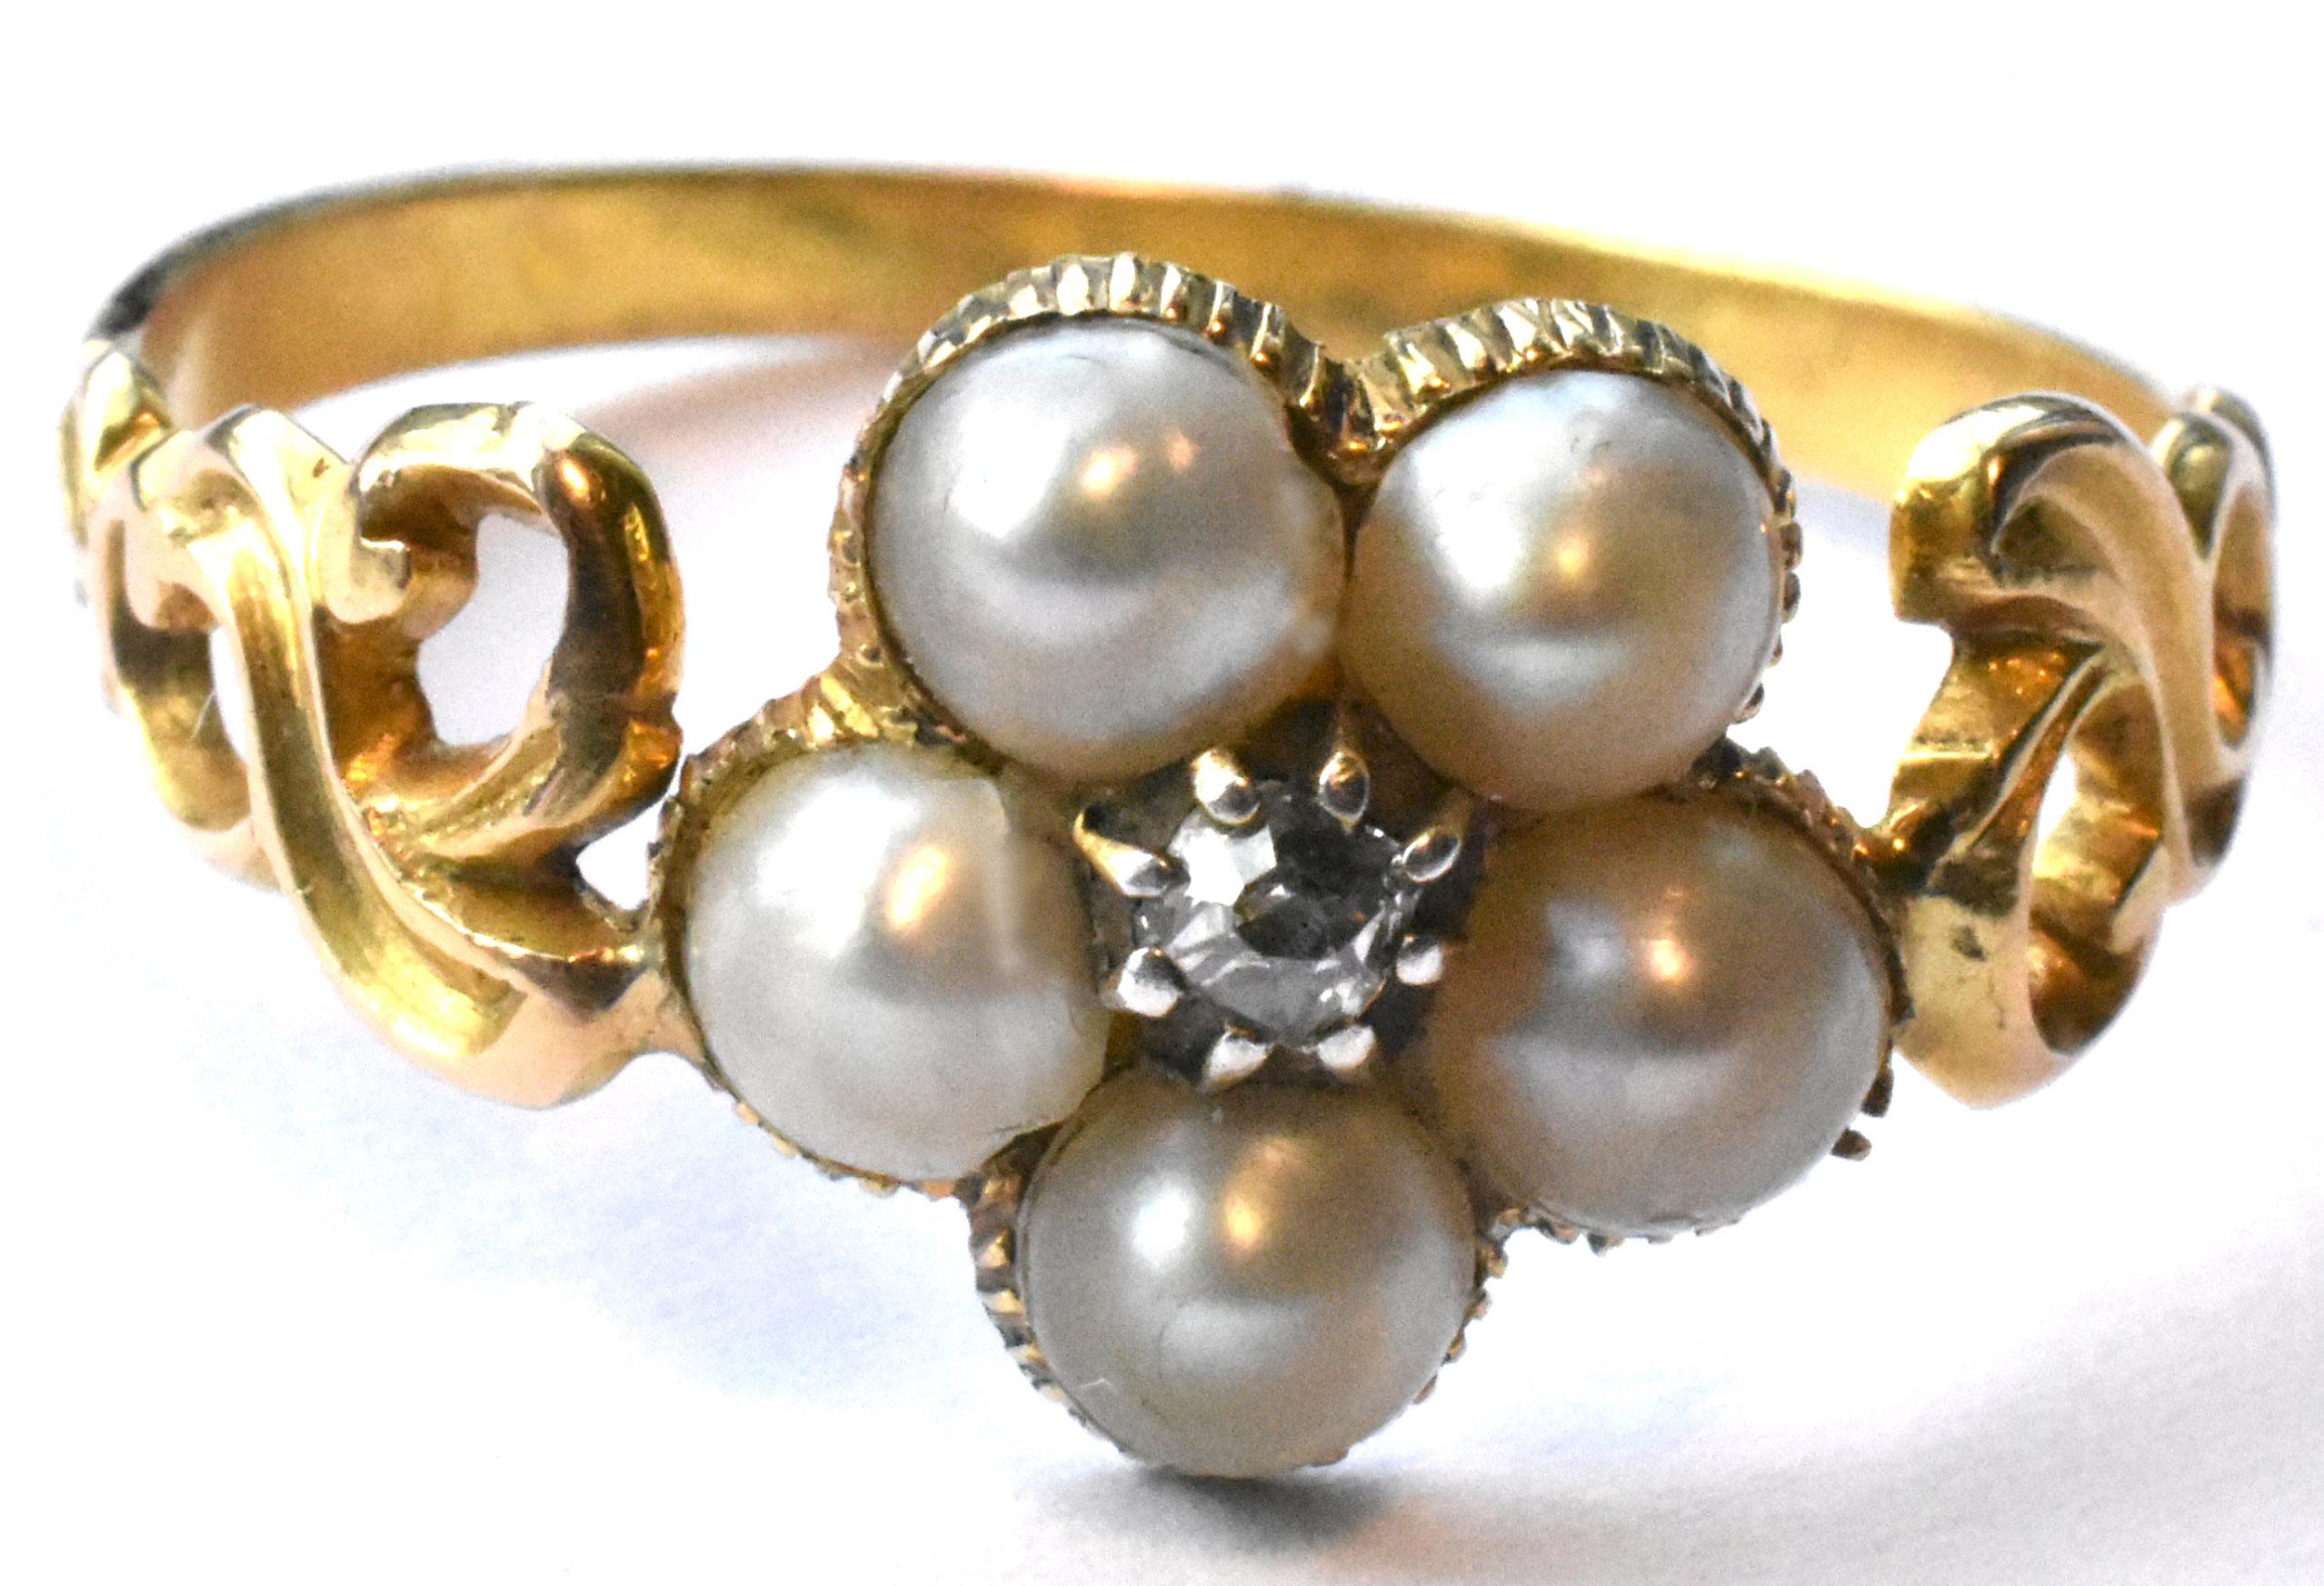 Beautiful feminine Georgian era 18 k cluster ring adorned with natural pearls and a rose cut diamond at its center. Pearls have a beautiful luster and the gold band of the ring is beautifully wrought in an open scrollwork pattern with incising, 